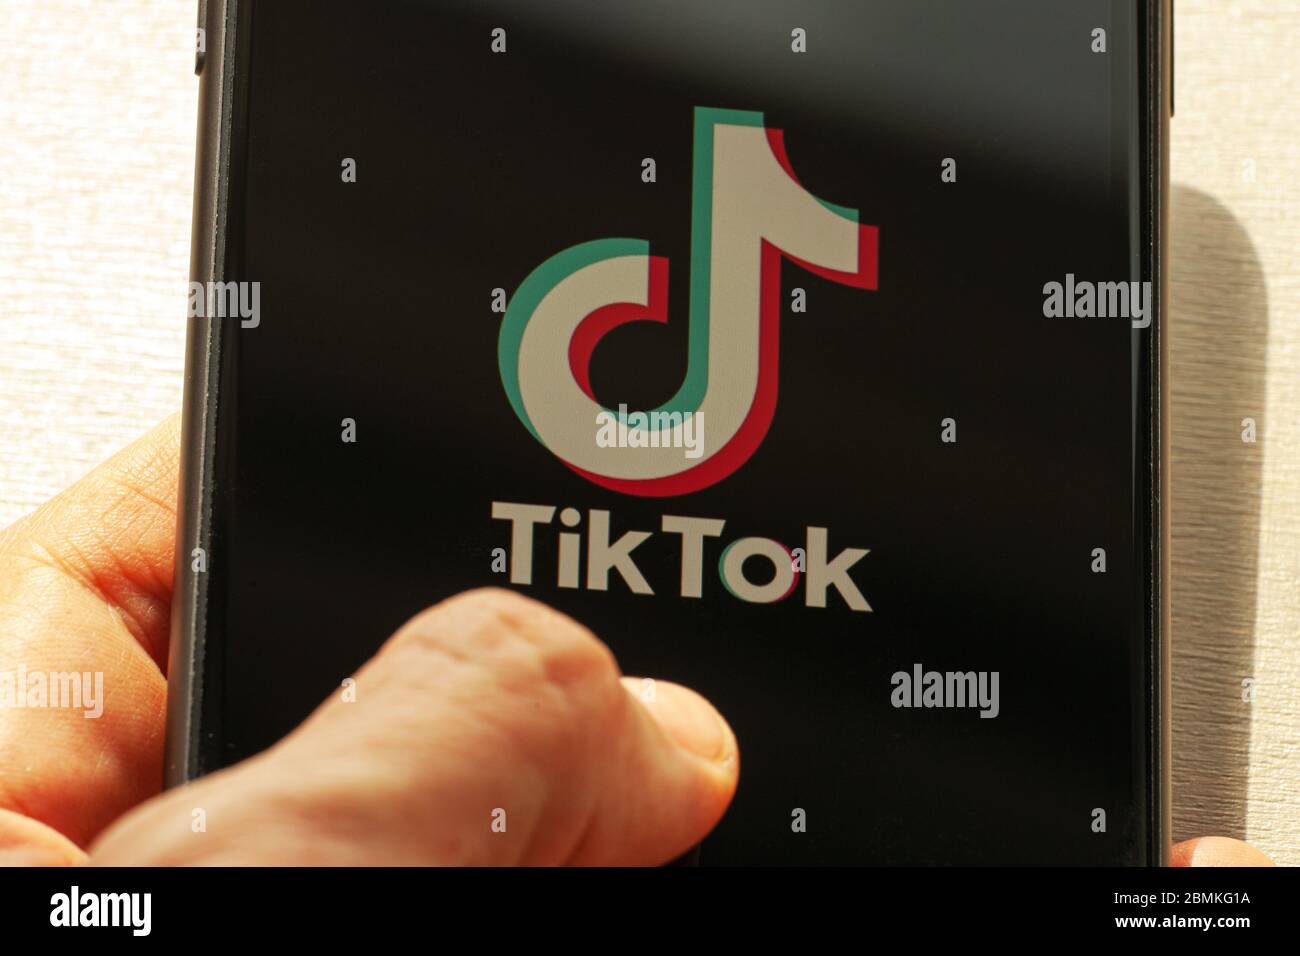 TikTok application icon on Apple iPhone 11 screen close-up. Hand holding smartphone with Tik Tok icon.  Tiktok Social media network from China. Stock Photo